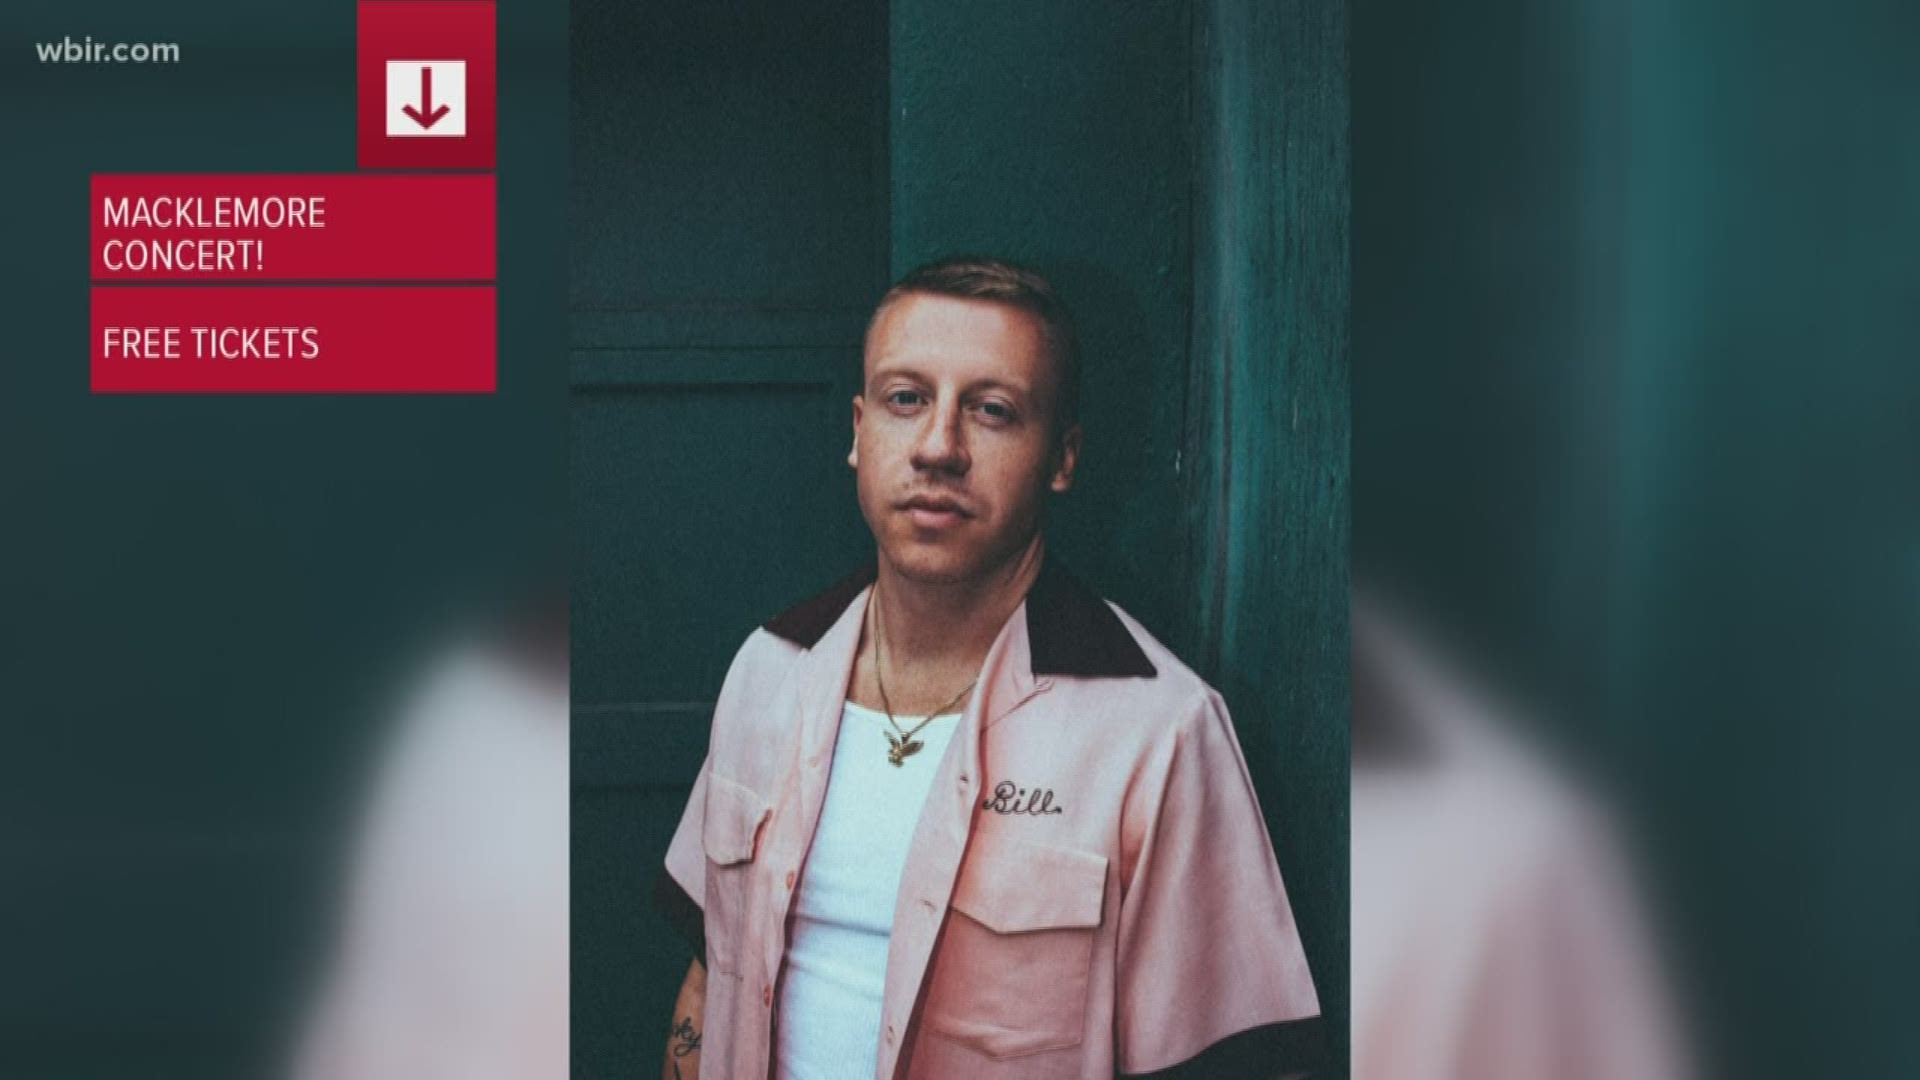 Next month, you can see Macklemore in concert for free. U.S. Cellular is hosting the free concert at Thompson-Boling Arena in celebration of 35 years of their wireless service in Knoxville.